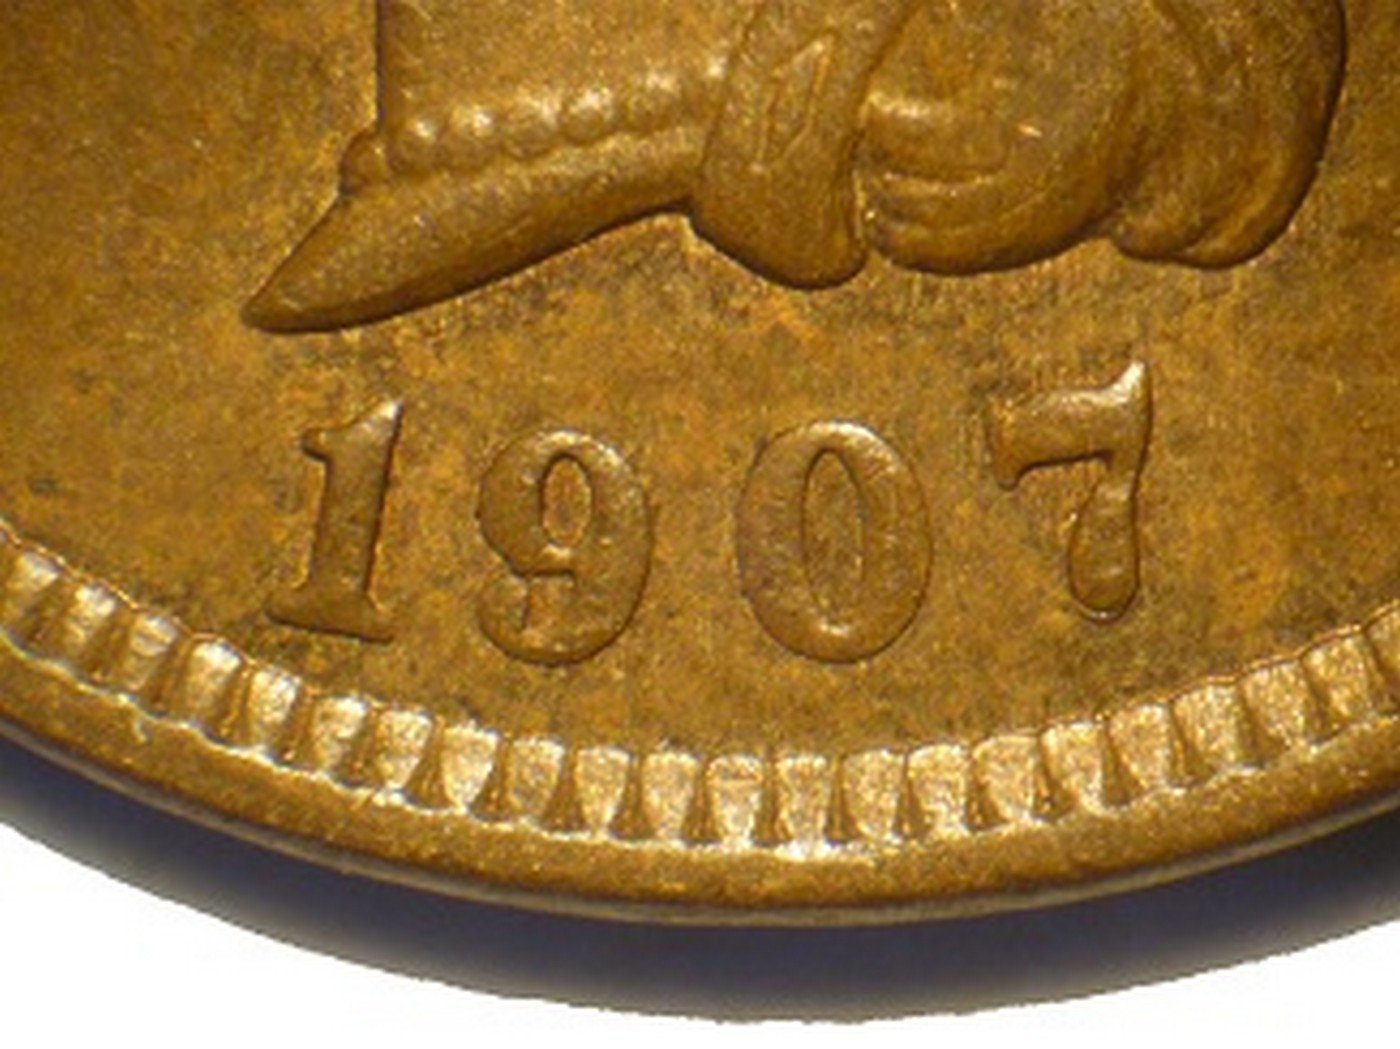 1907 RPD-013 - Indian Head Penny - Photo by David Poliquin